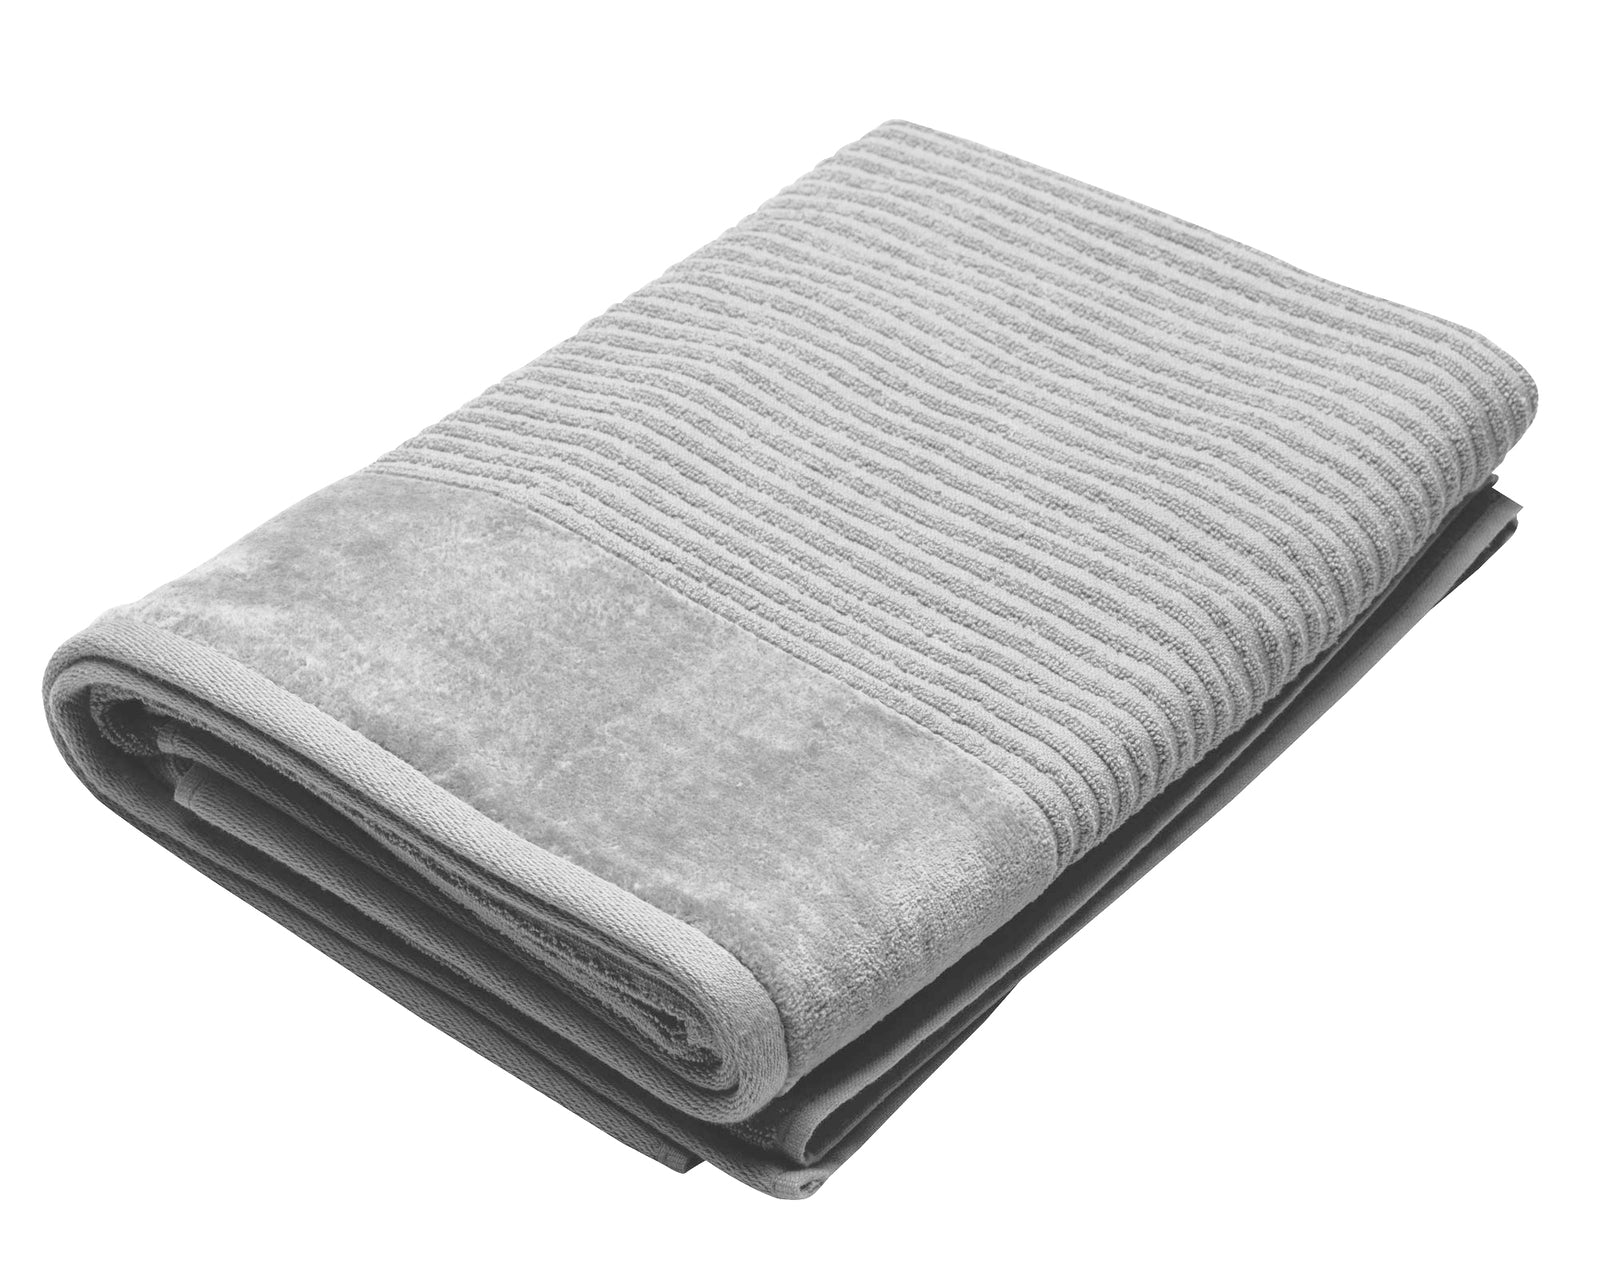 Jenny Mclean Royal Excellency Bath Sheet 2 ply sheared Border 600GSM in Silver